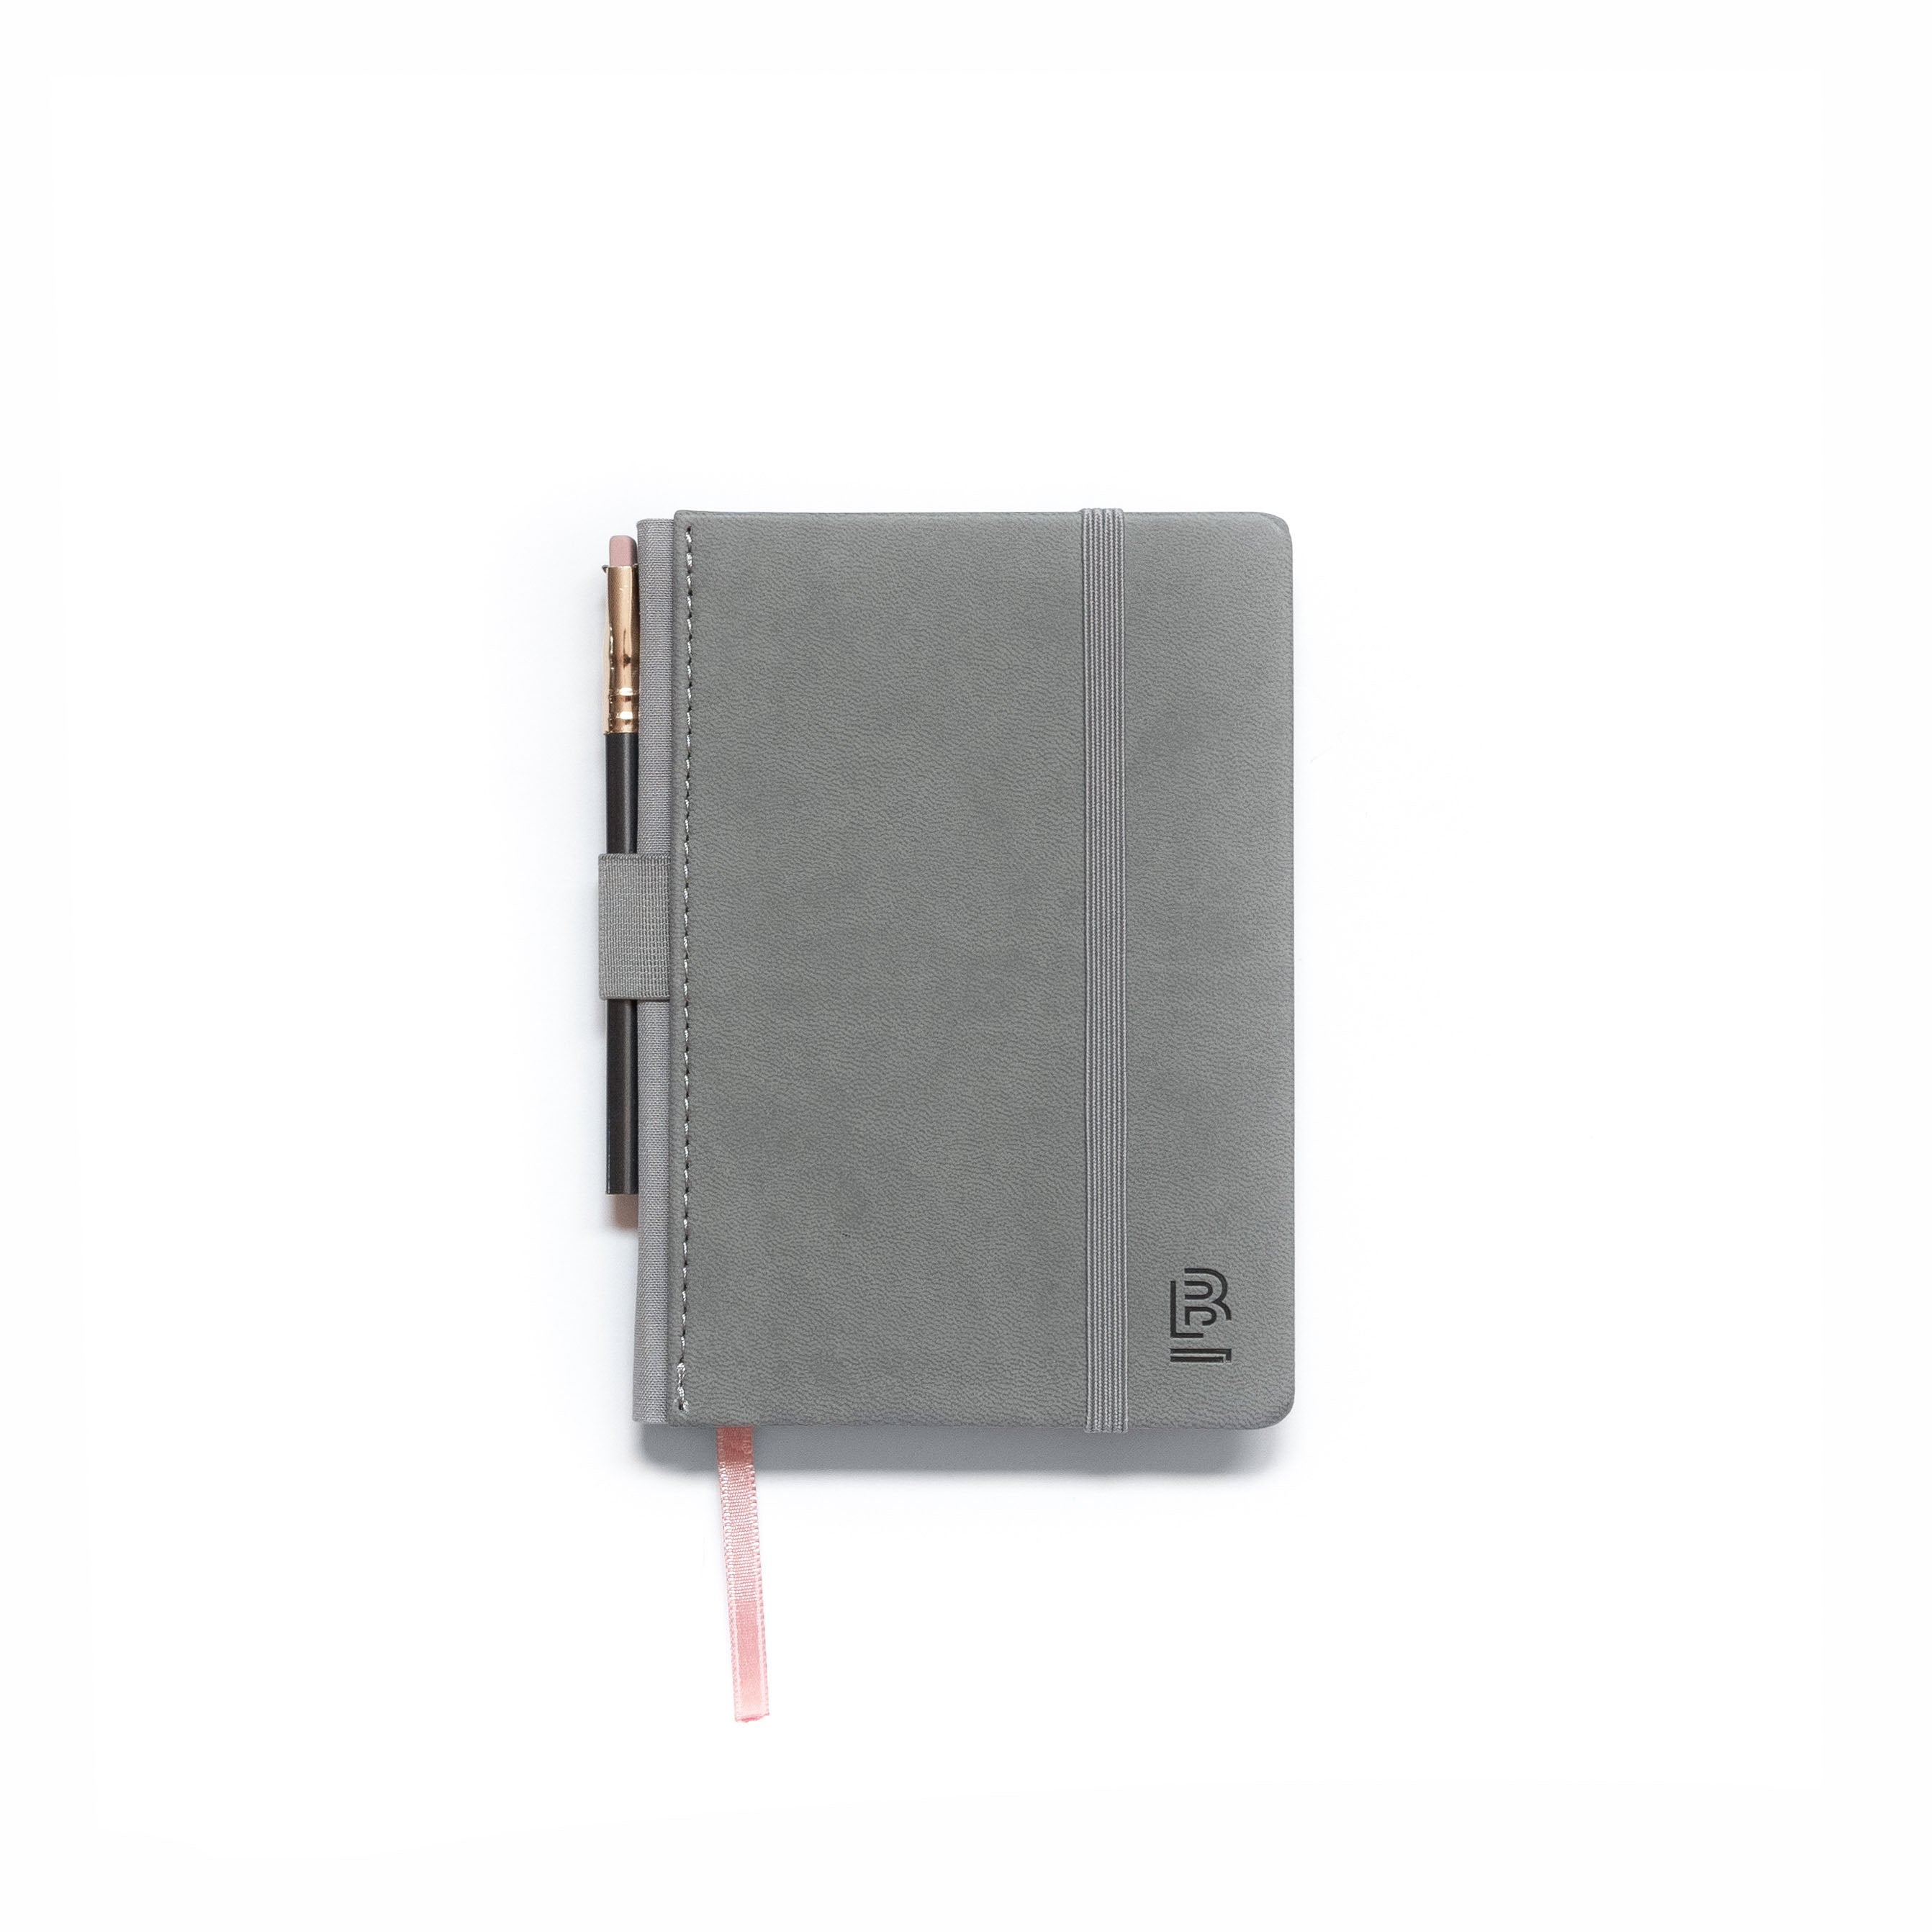 Magnetic Address Book - Tiny Address Book - Magnetic Phone Number Book -  Pocket Address Book - Wallet Size Address Book, 21 Pages, 9 Lines - Keep